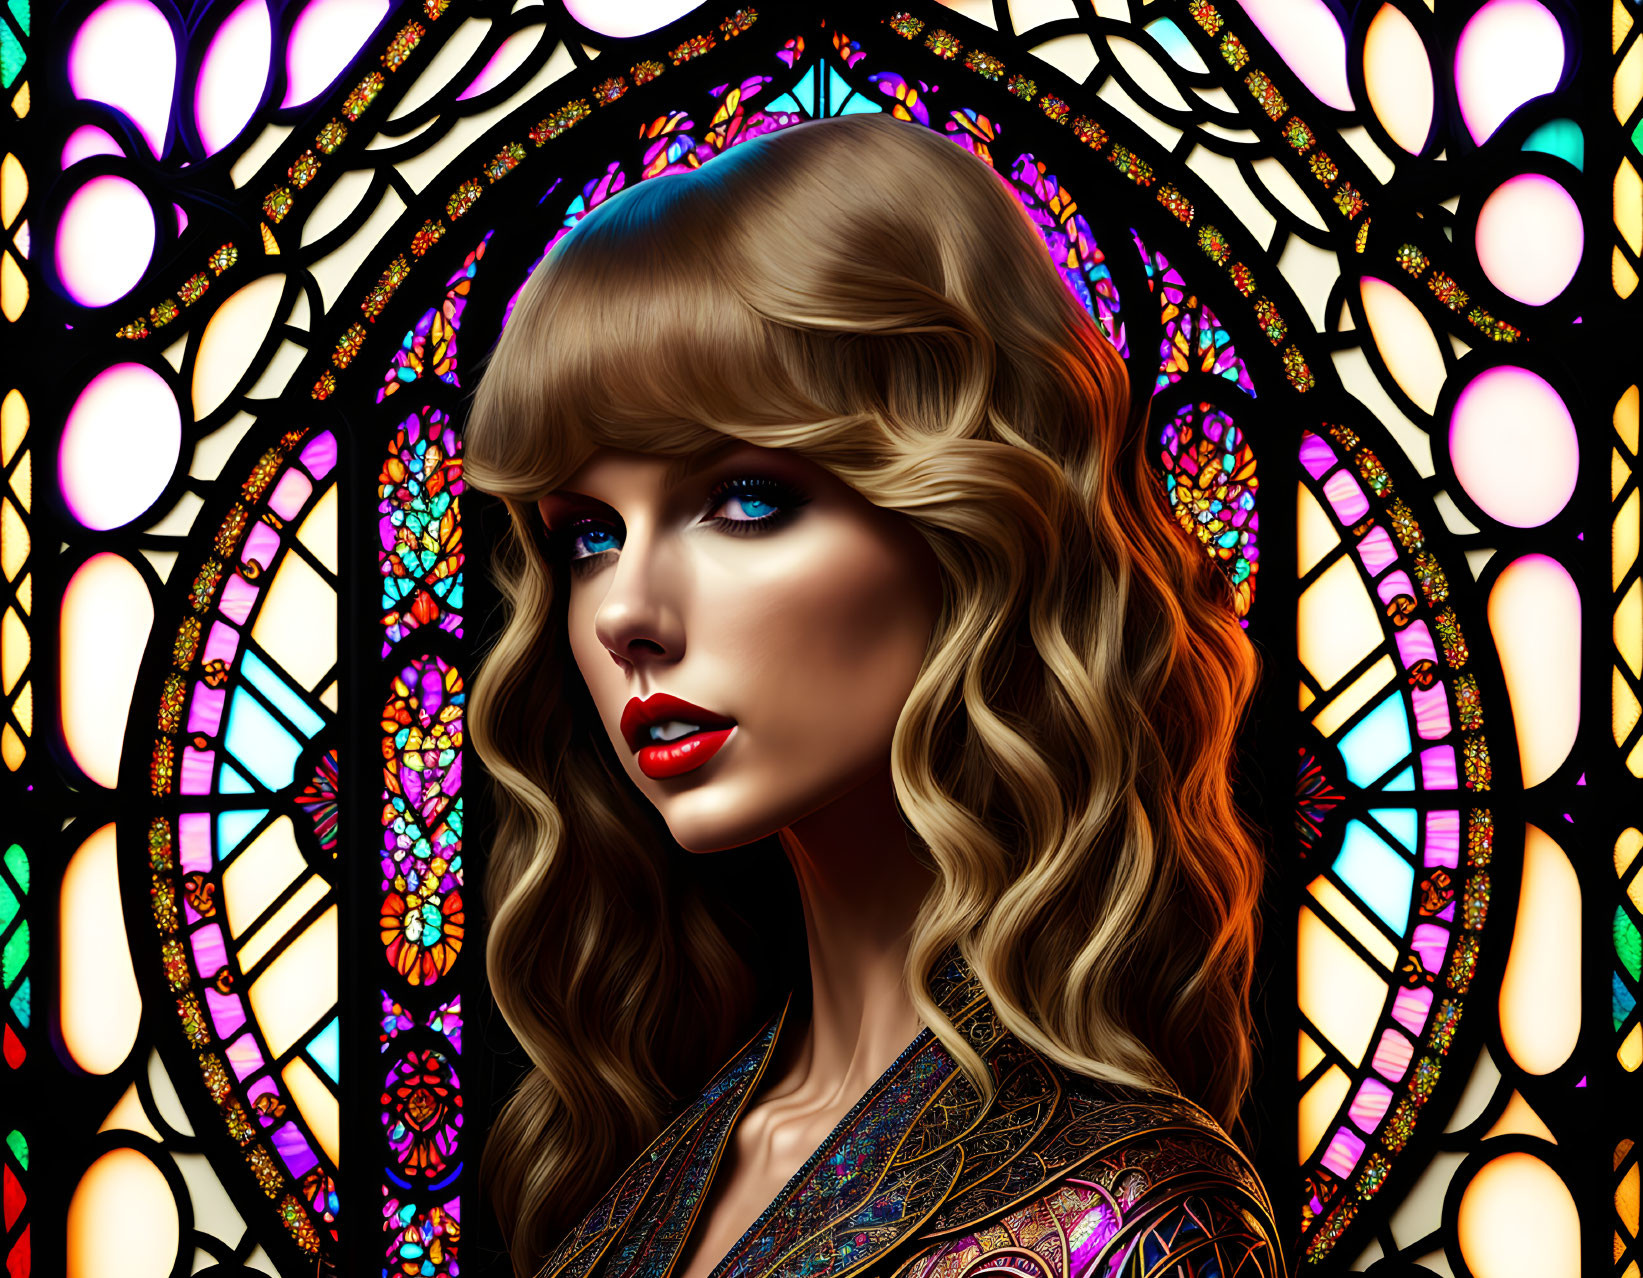 Stain glass Queen